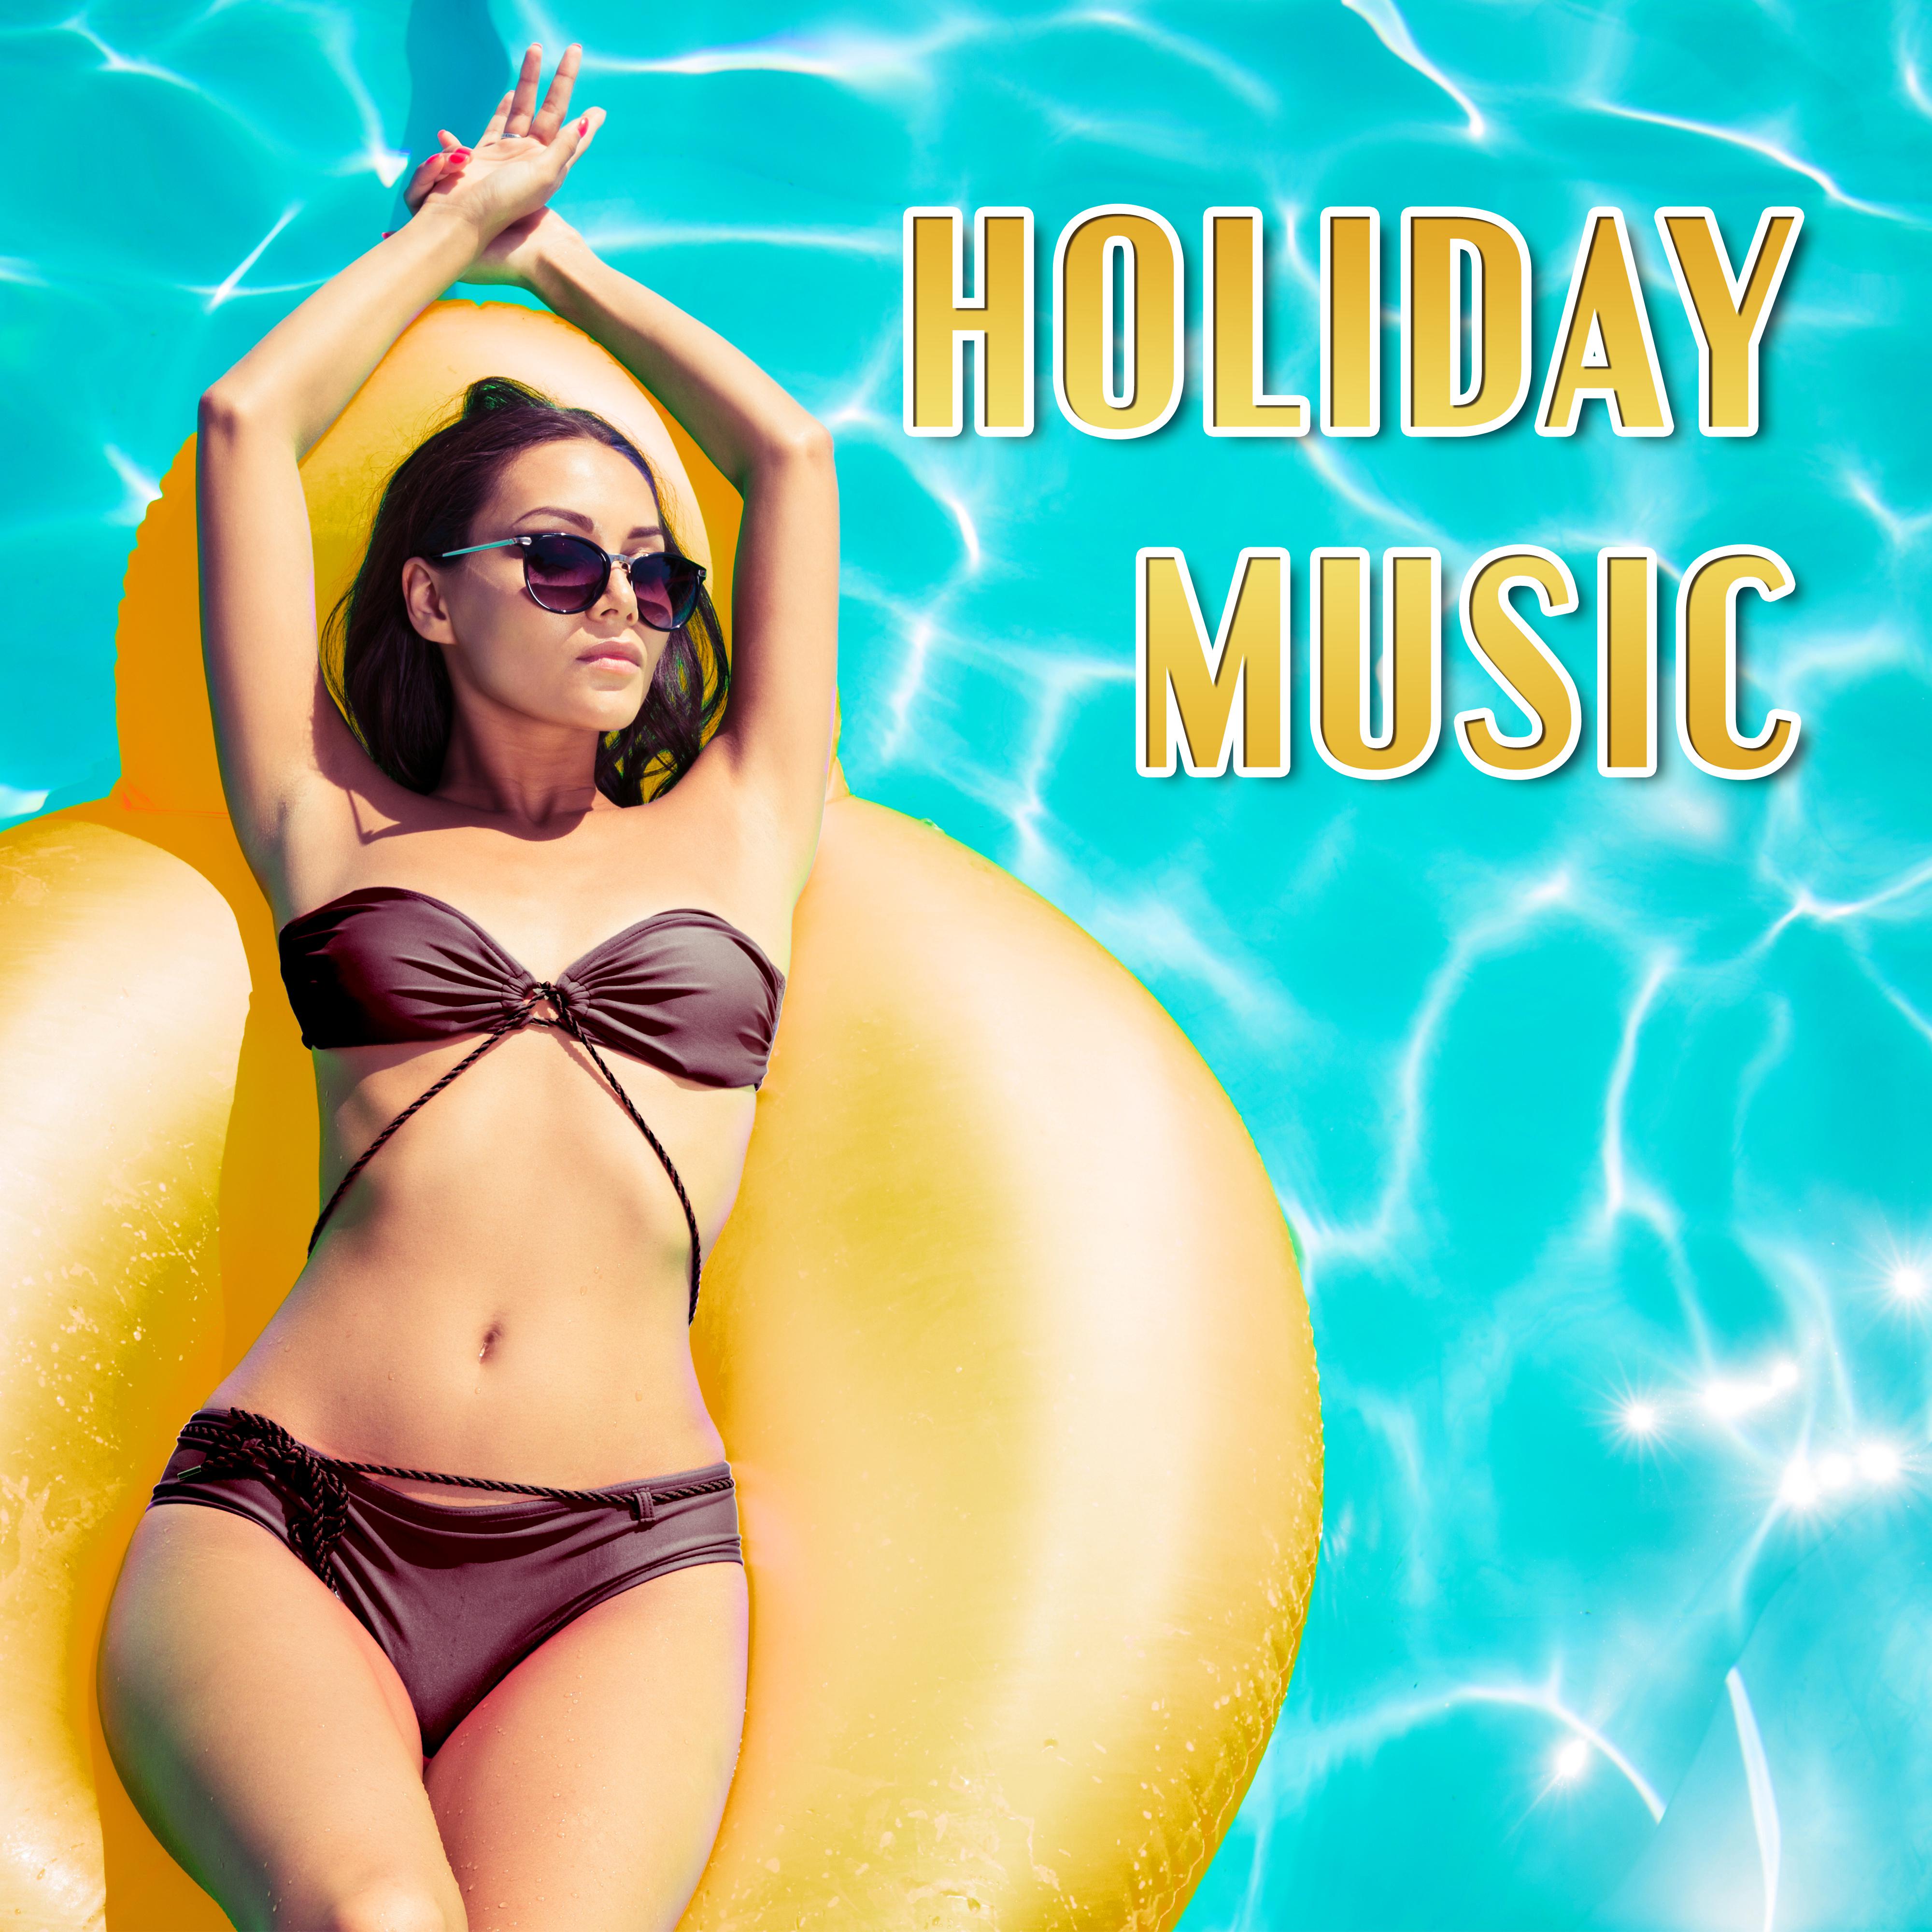 Holiday Music  Chillout 2017, Summertime, Good Vibes, Pool Party, Relax By The Pool